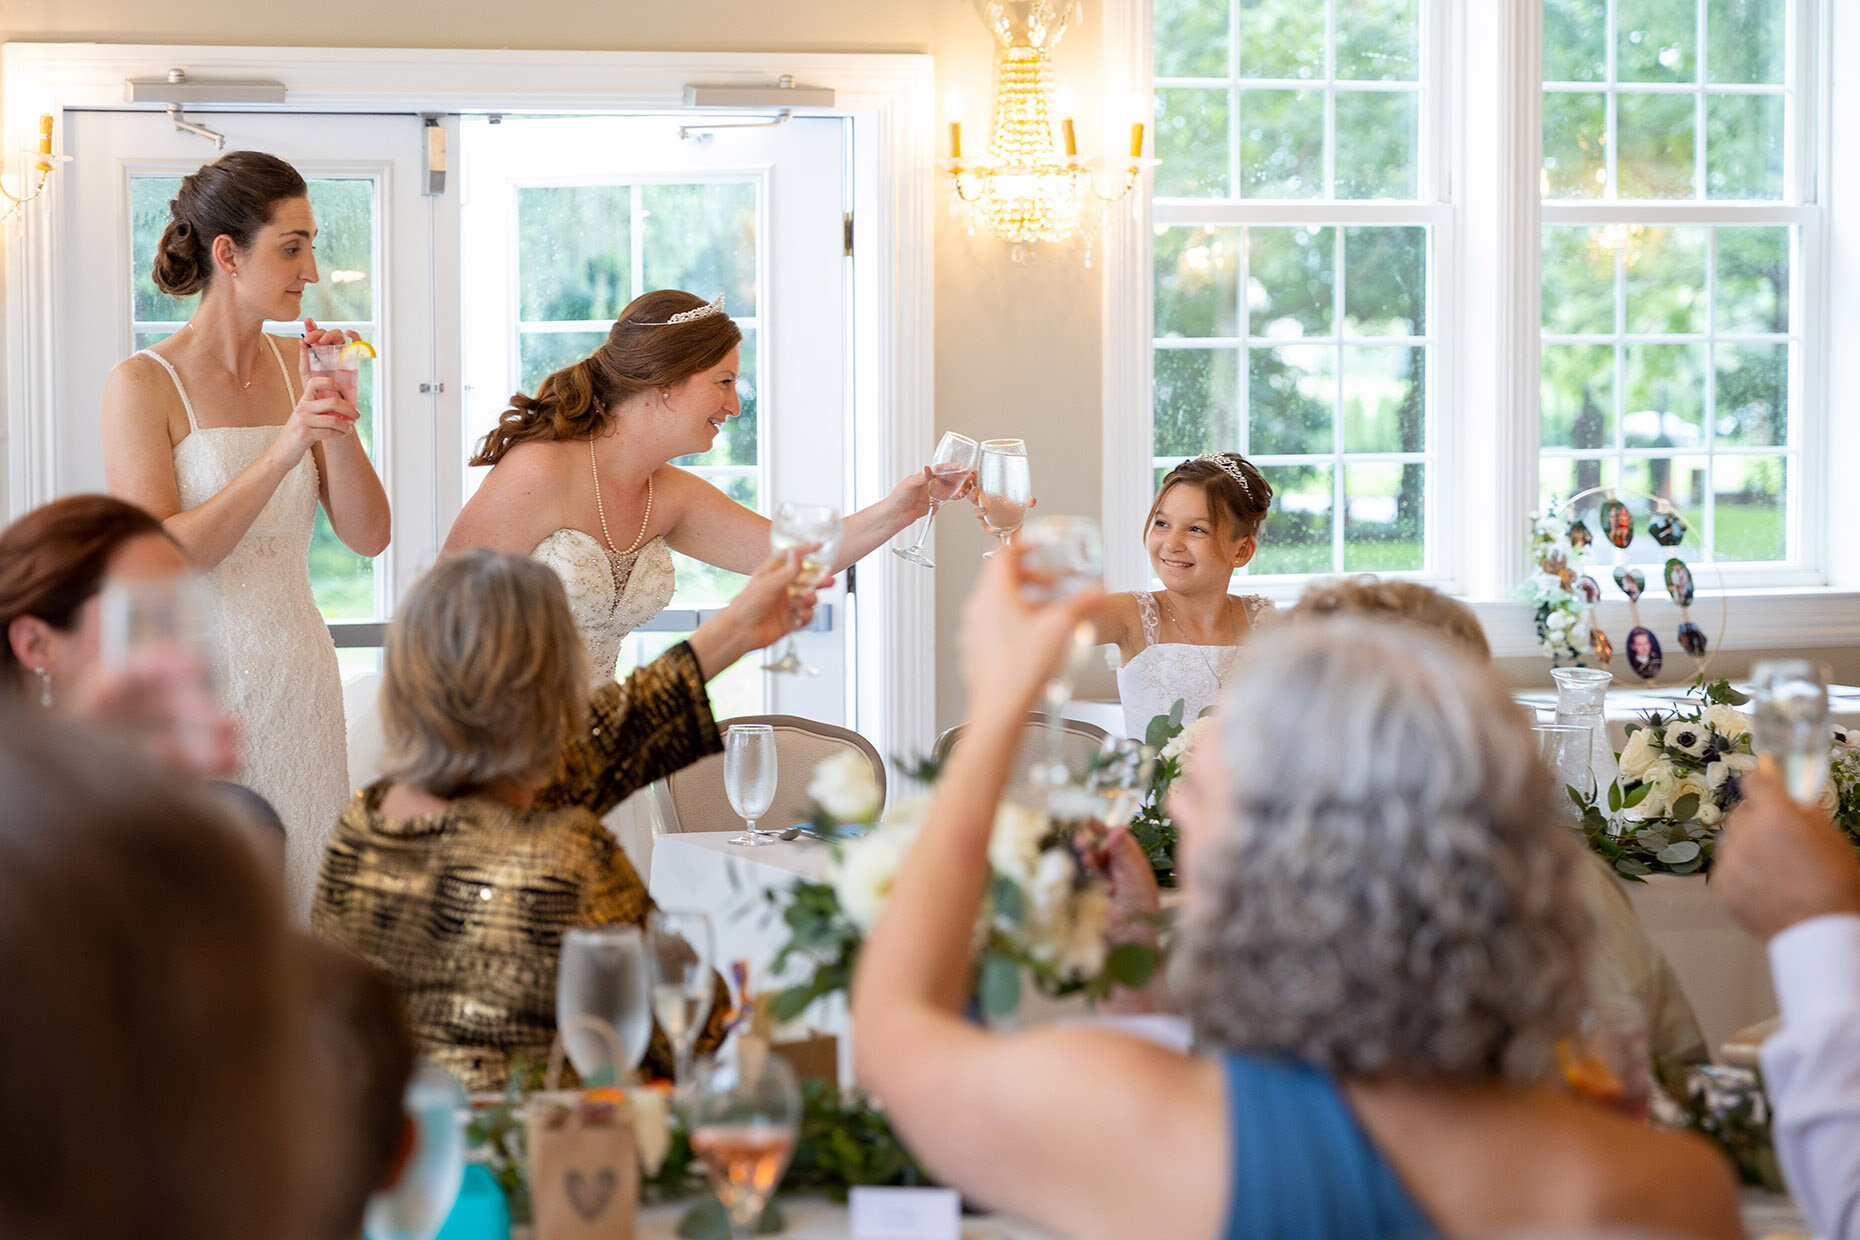 Daughter Toast at Reception for Same Sex Couple